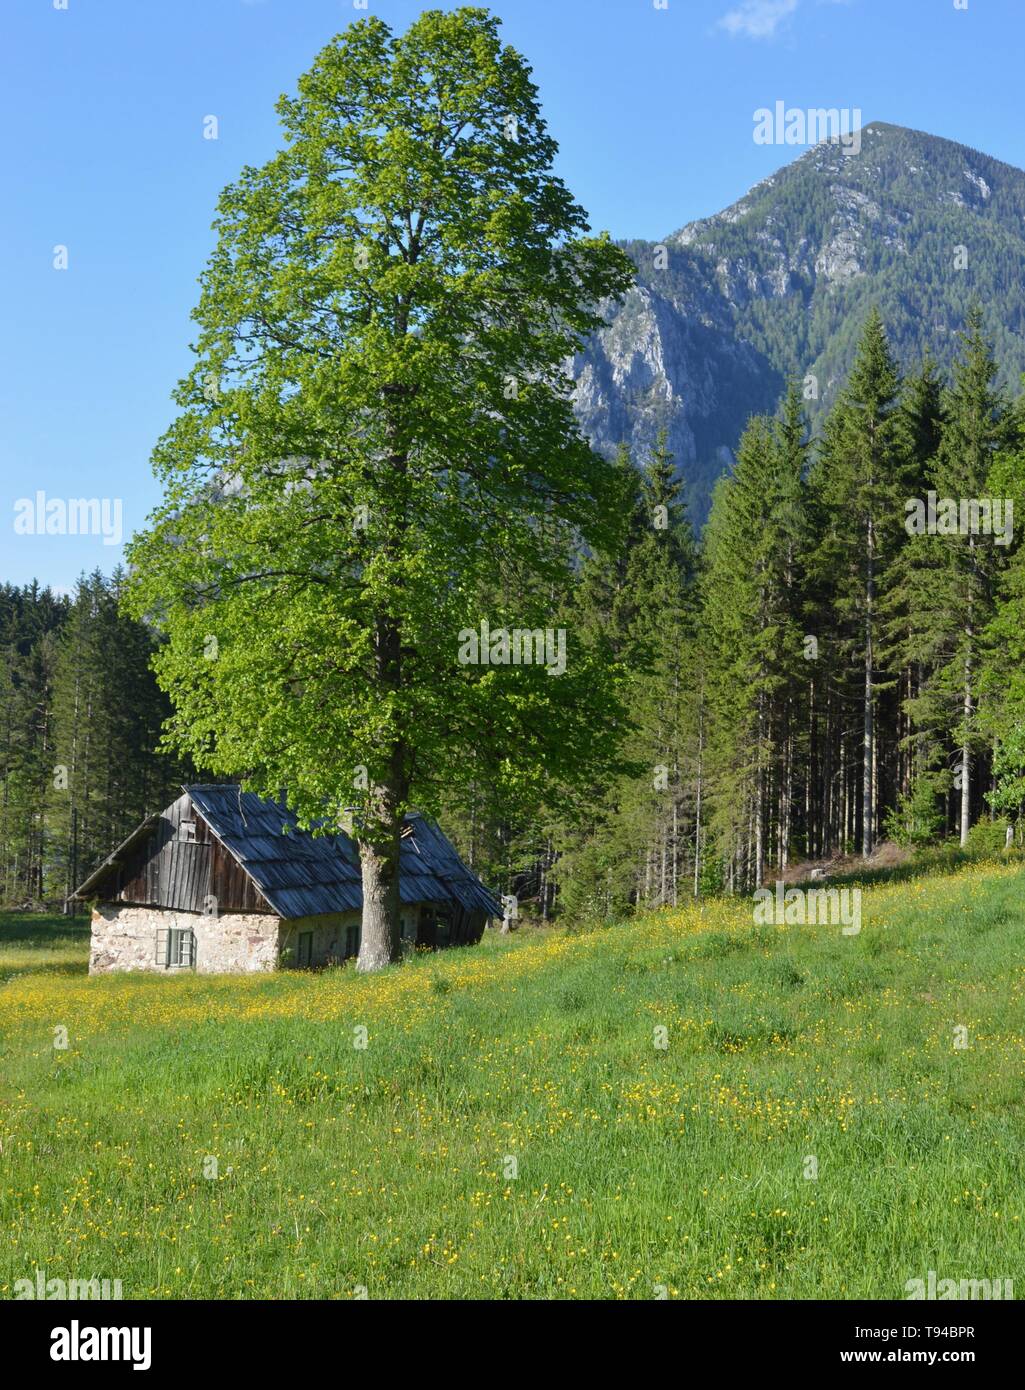 Mountain hut in green valley surrounded with mountains Stock Photo